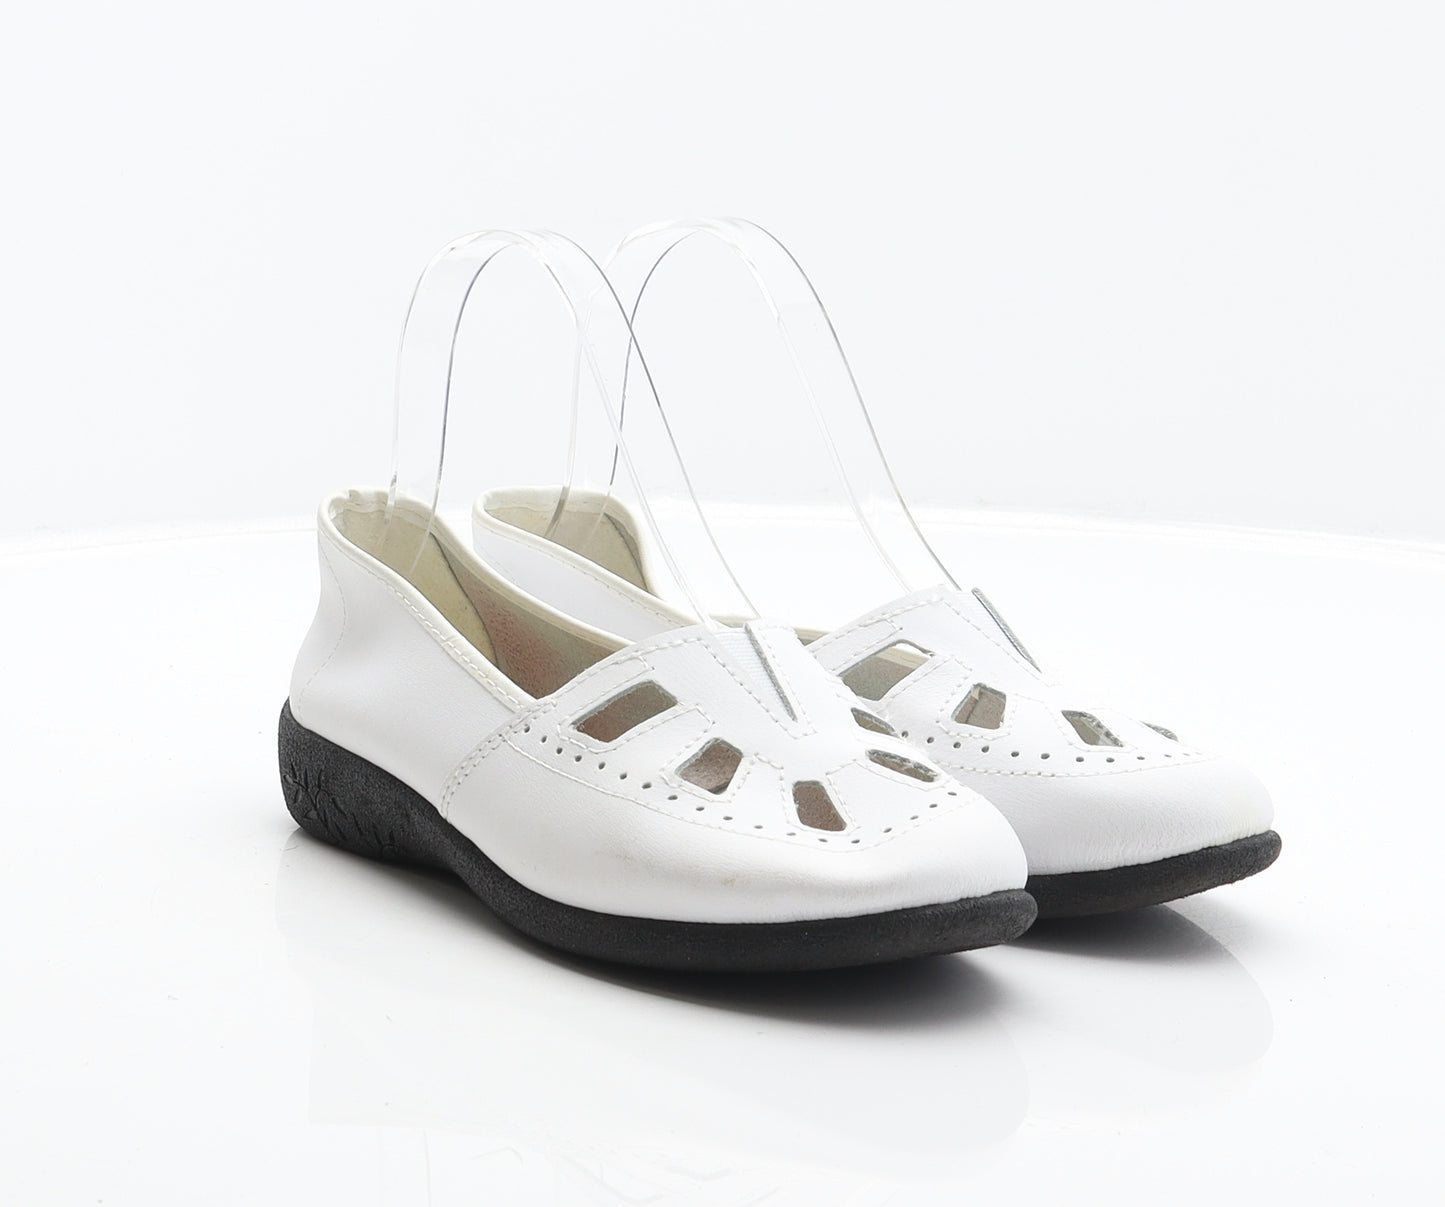 Preworn Womens White Leather Loafer Casual UK 4 37